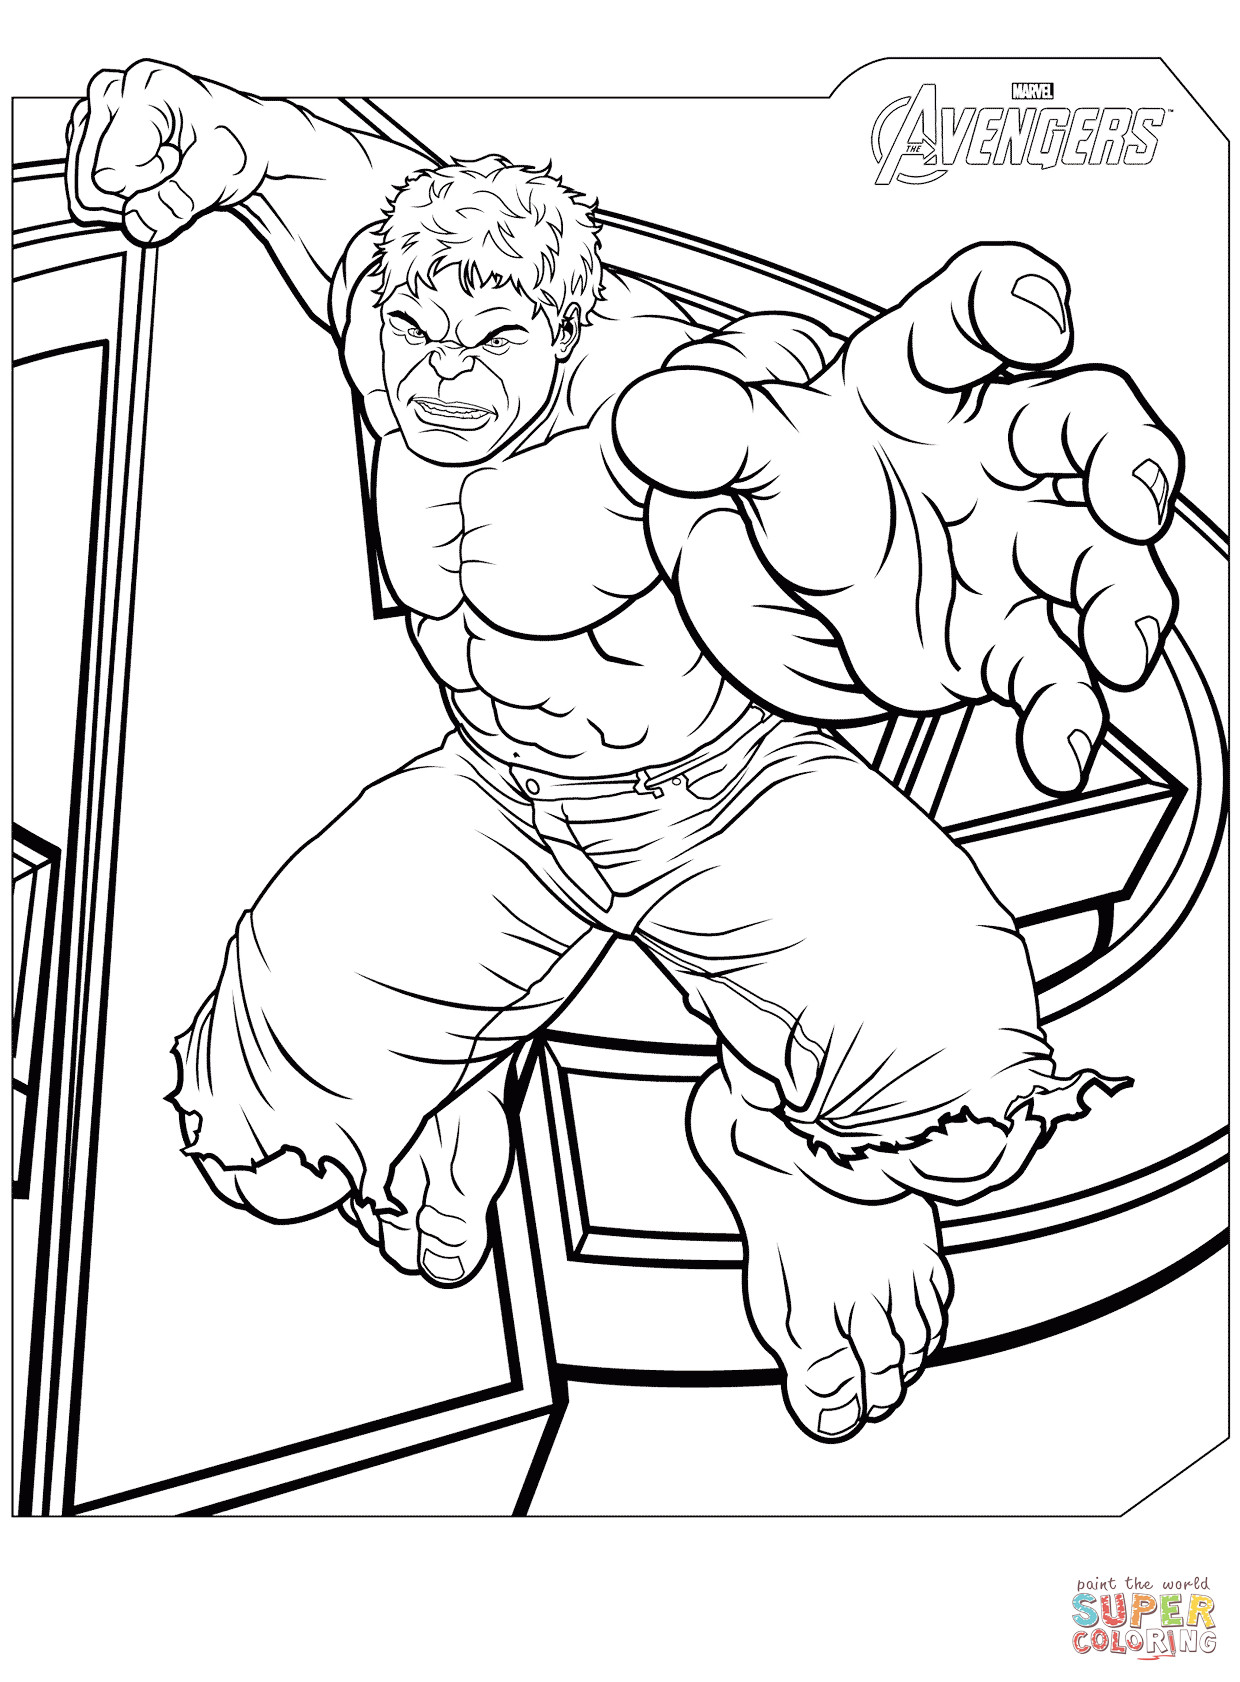 Avengers Coloring Pages Printable
 Avengers Hulk coloring page